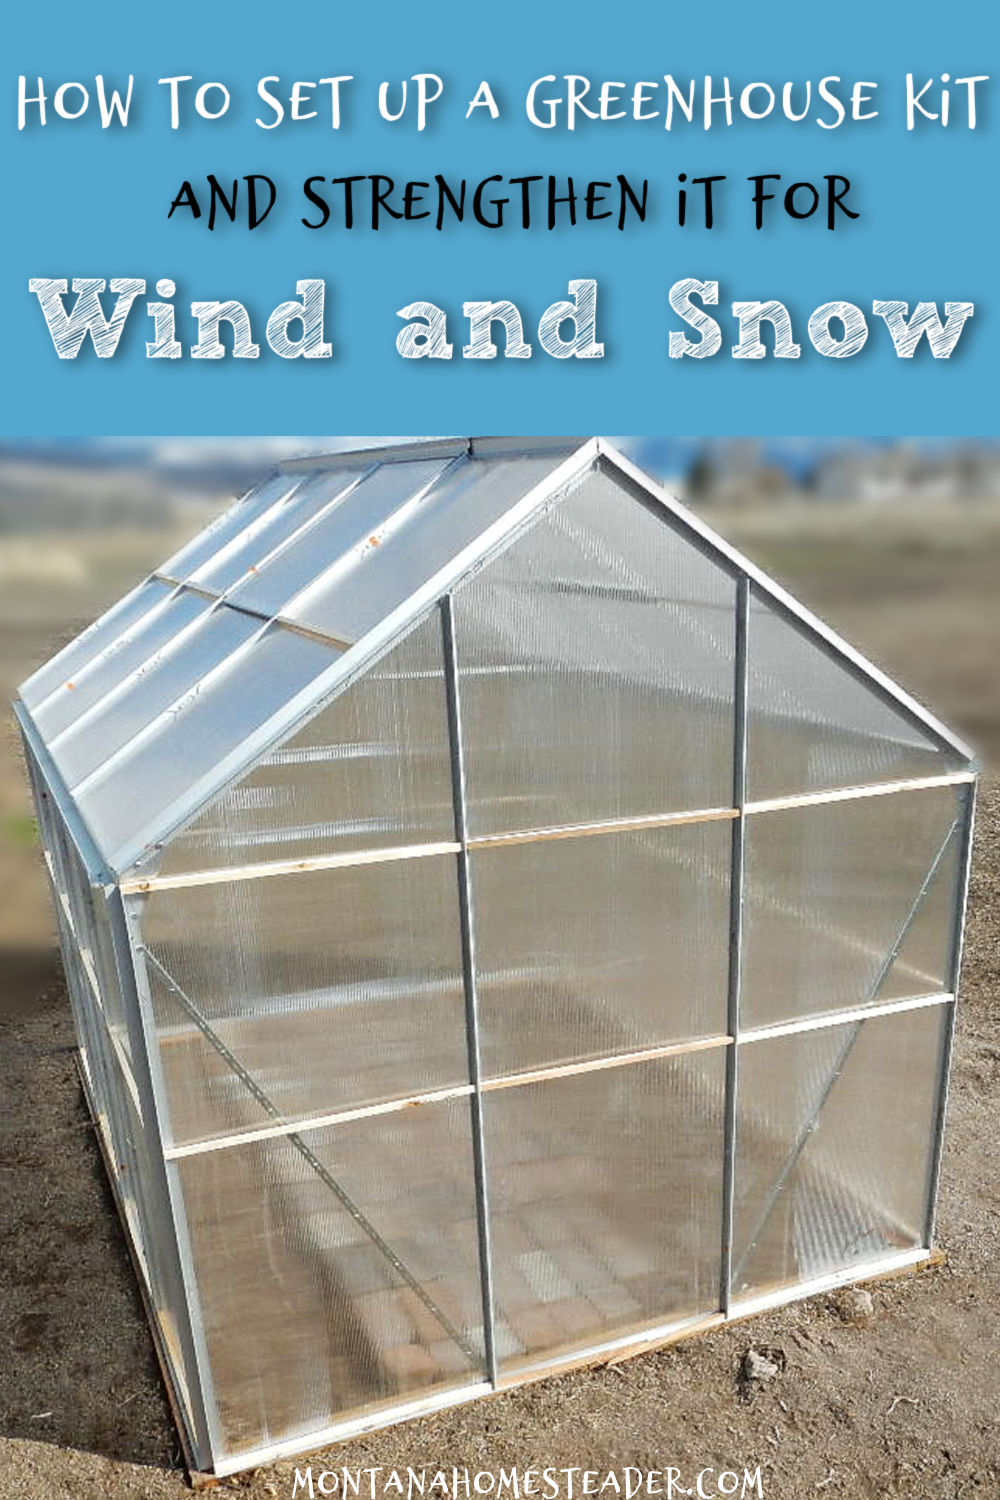 How to set up a greenhouse kit and strengthen it for wind and snow picture showing anchoring it to wood in the ground adding cross brace supports to stabilize it